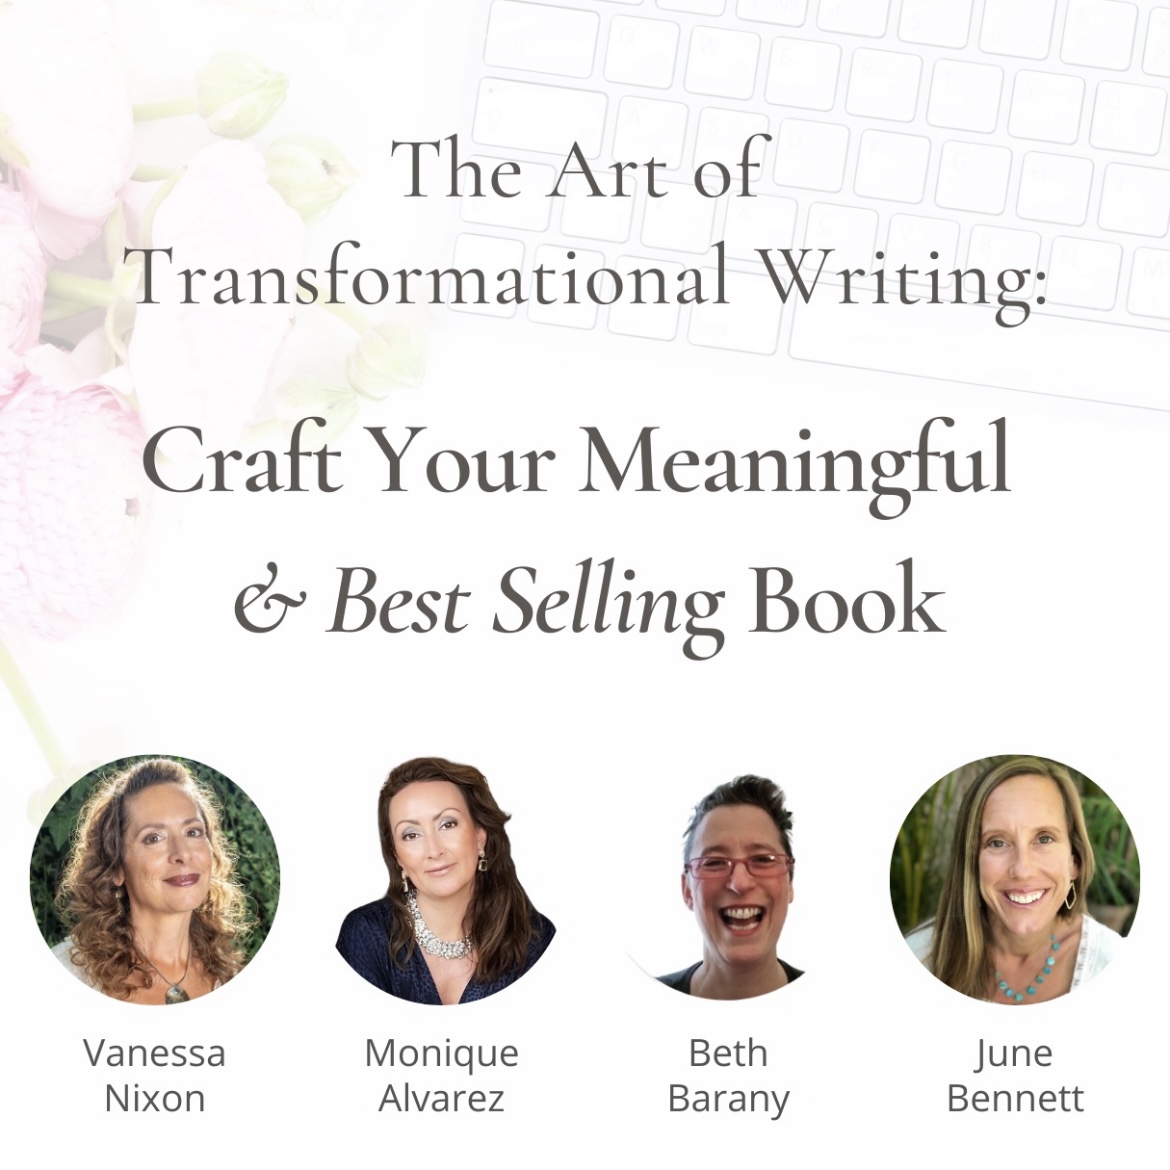 “The Art of Transformational Writing: Craft Your Meaningful (and Best Selling) Book”  Friday, June 16th, 2023 